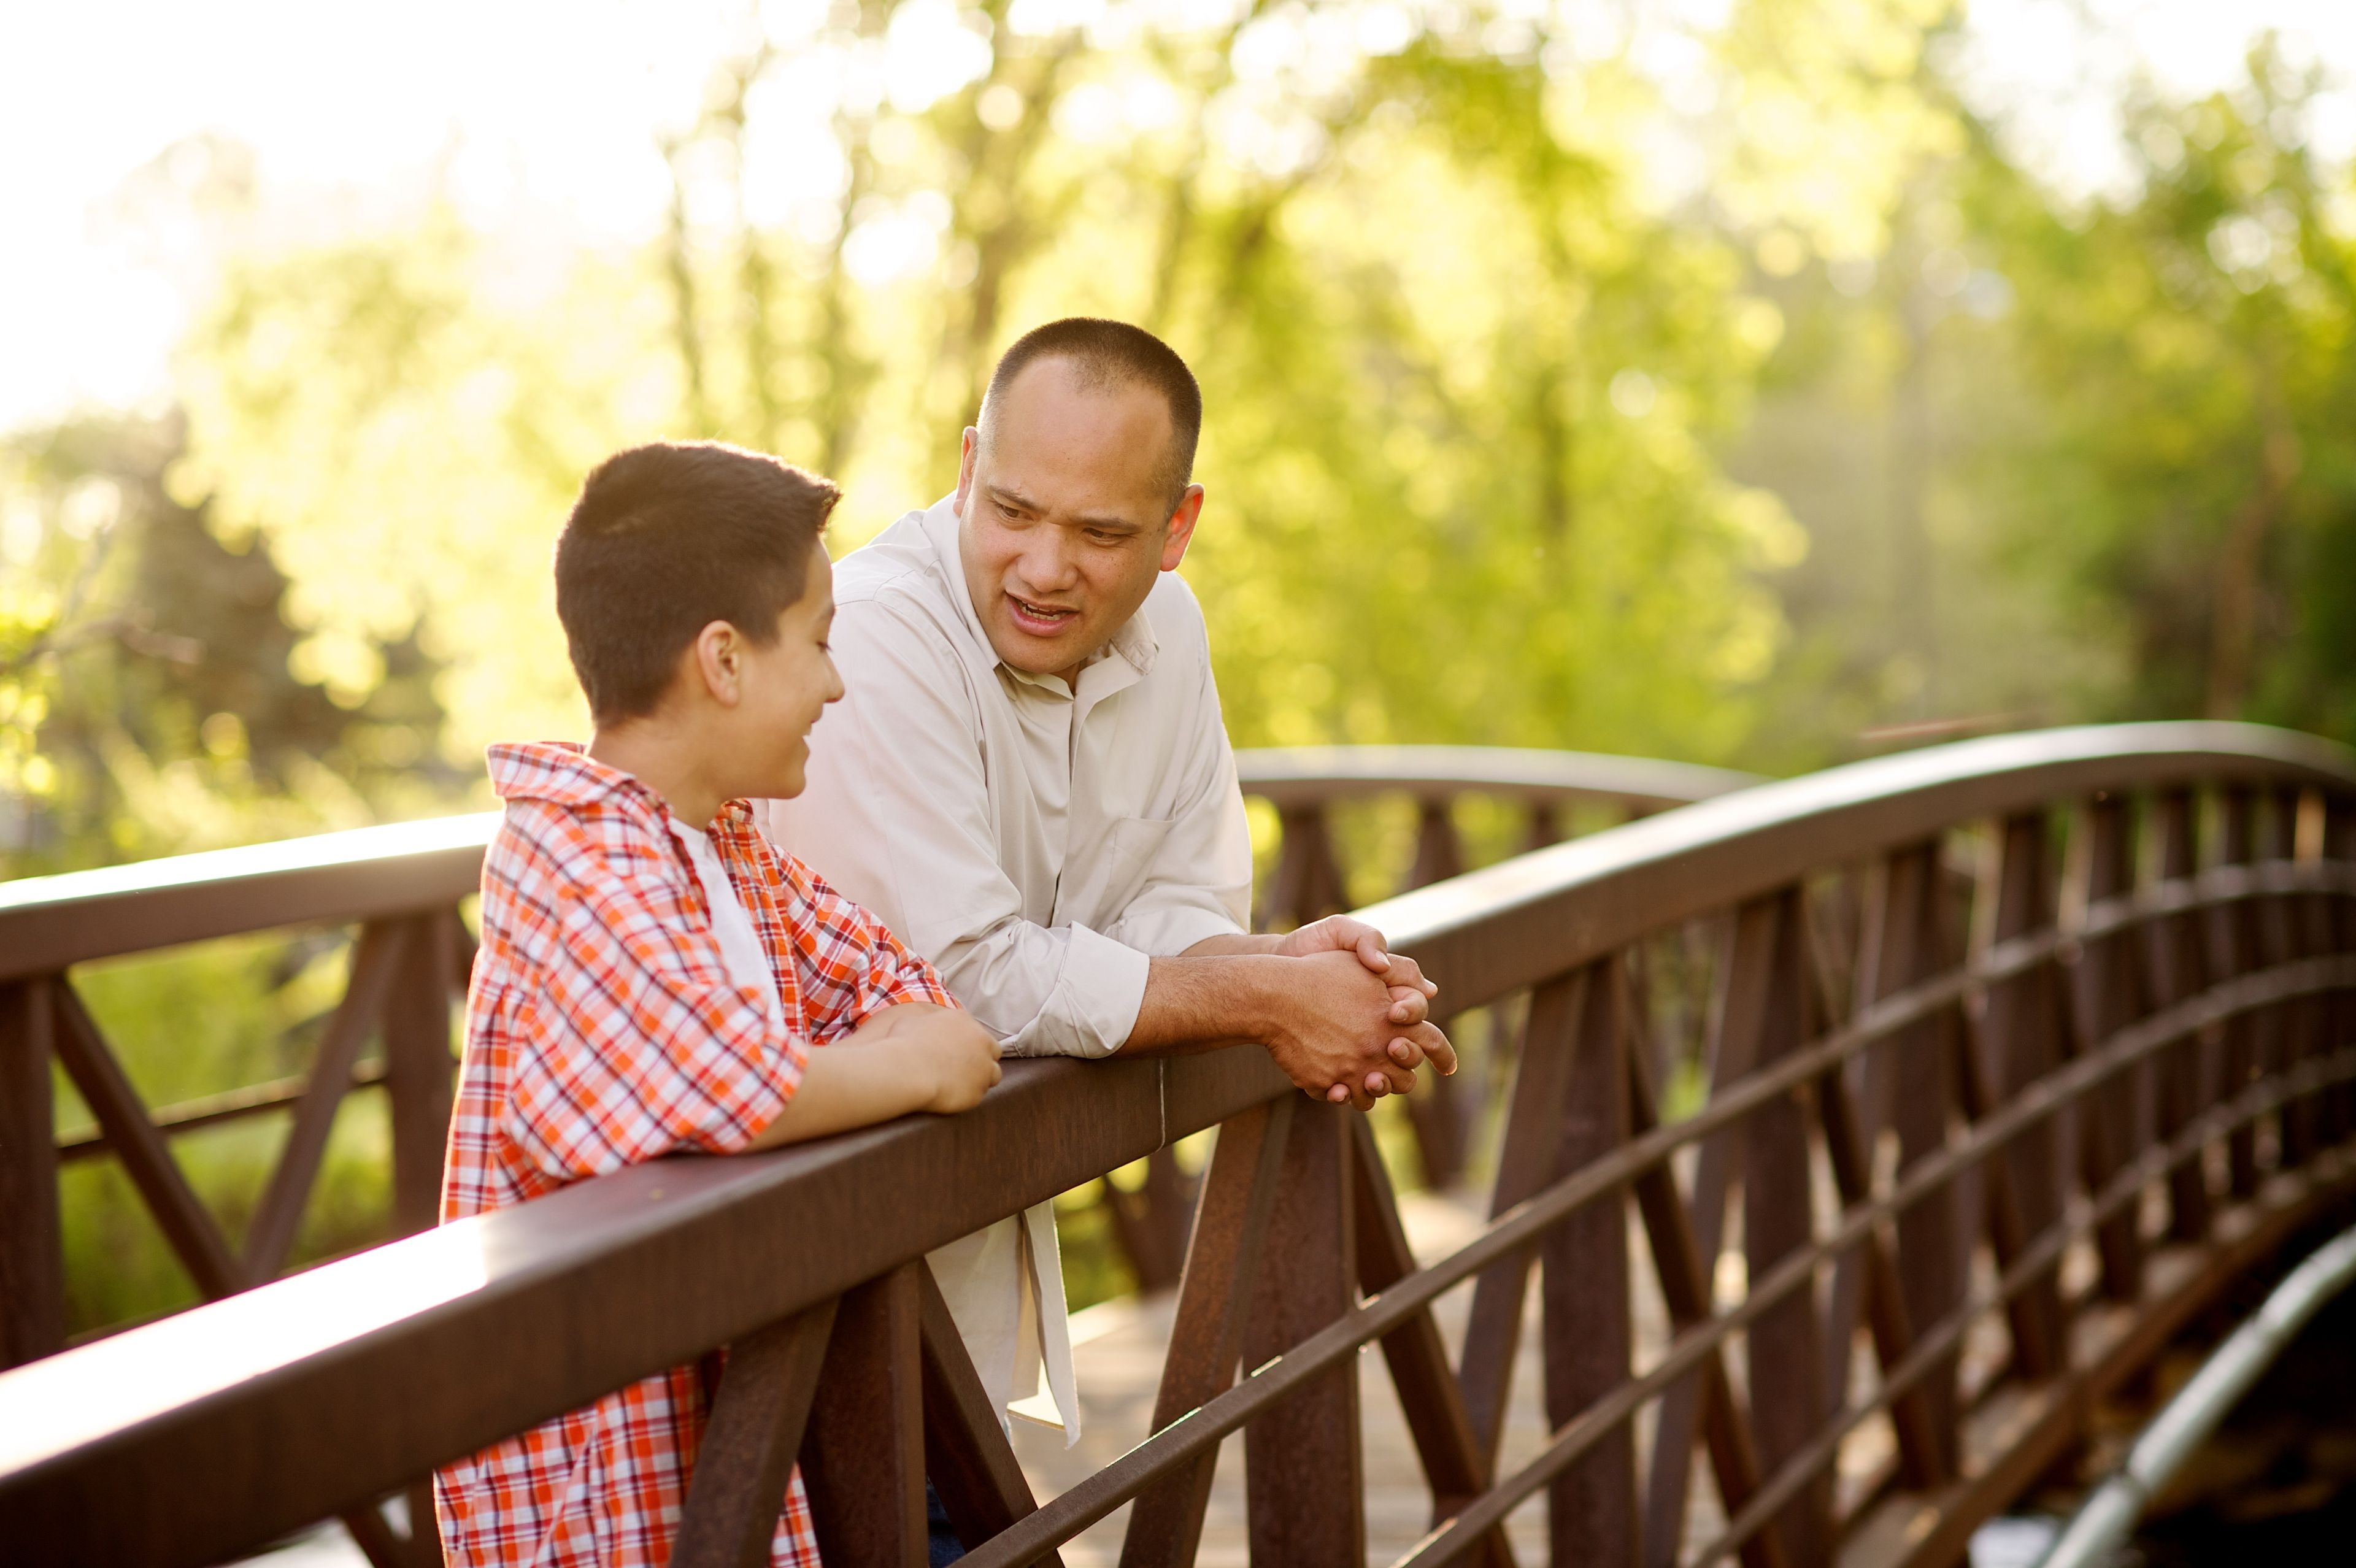 Father and Son on a Bridge.